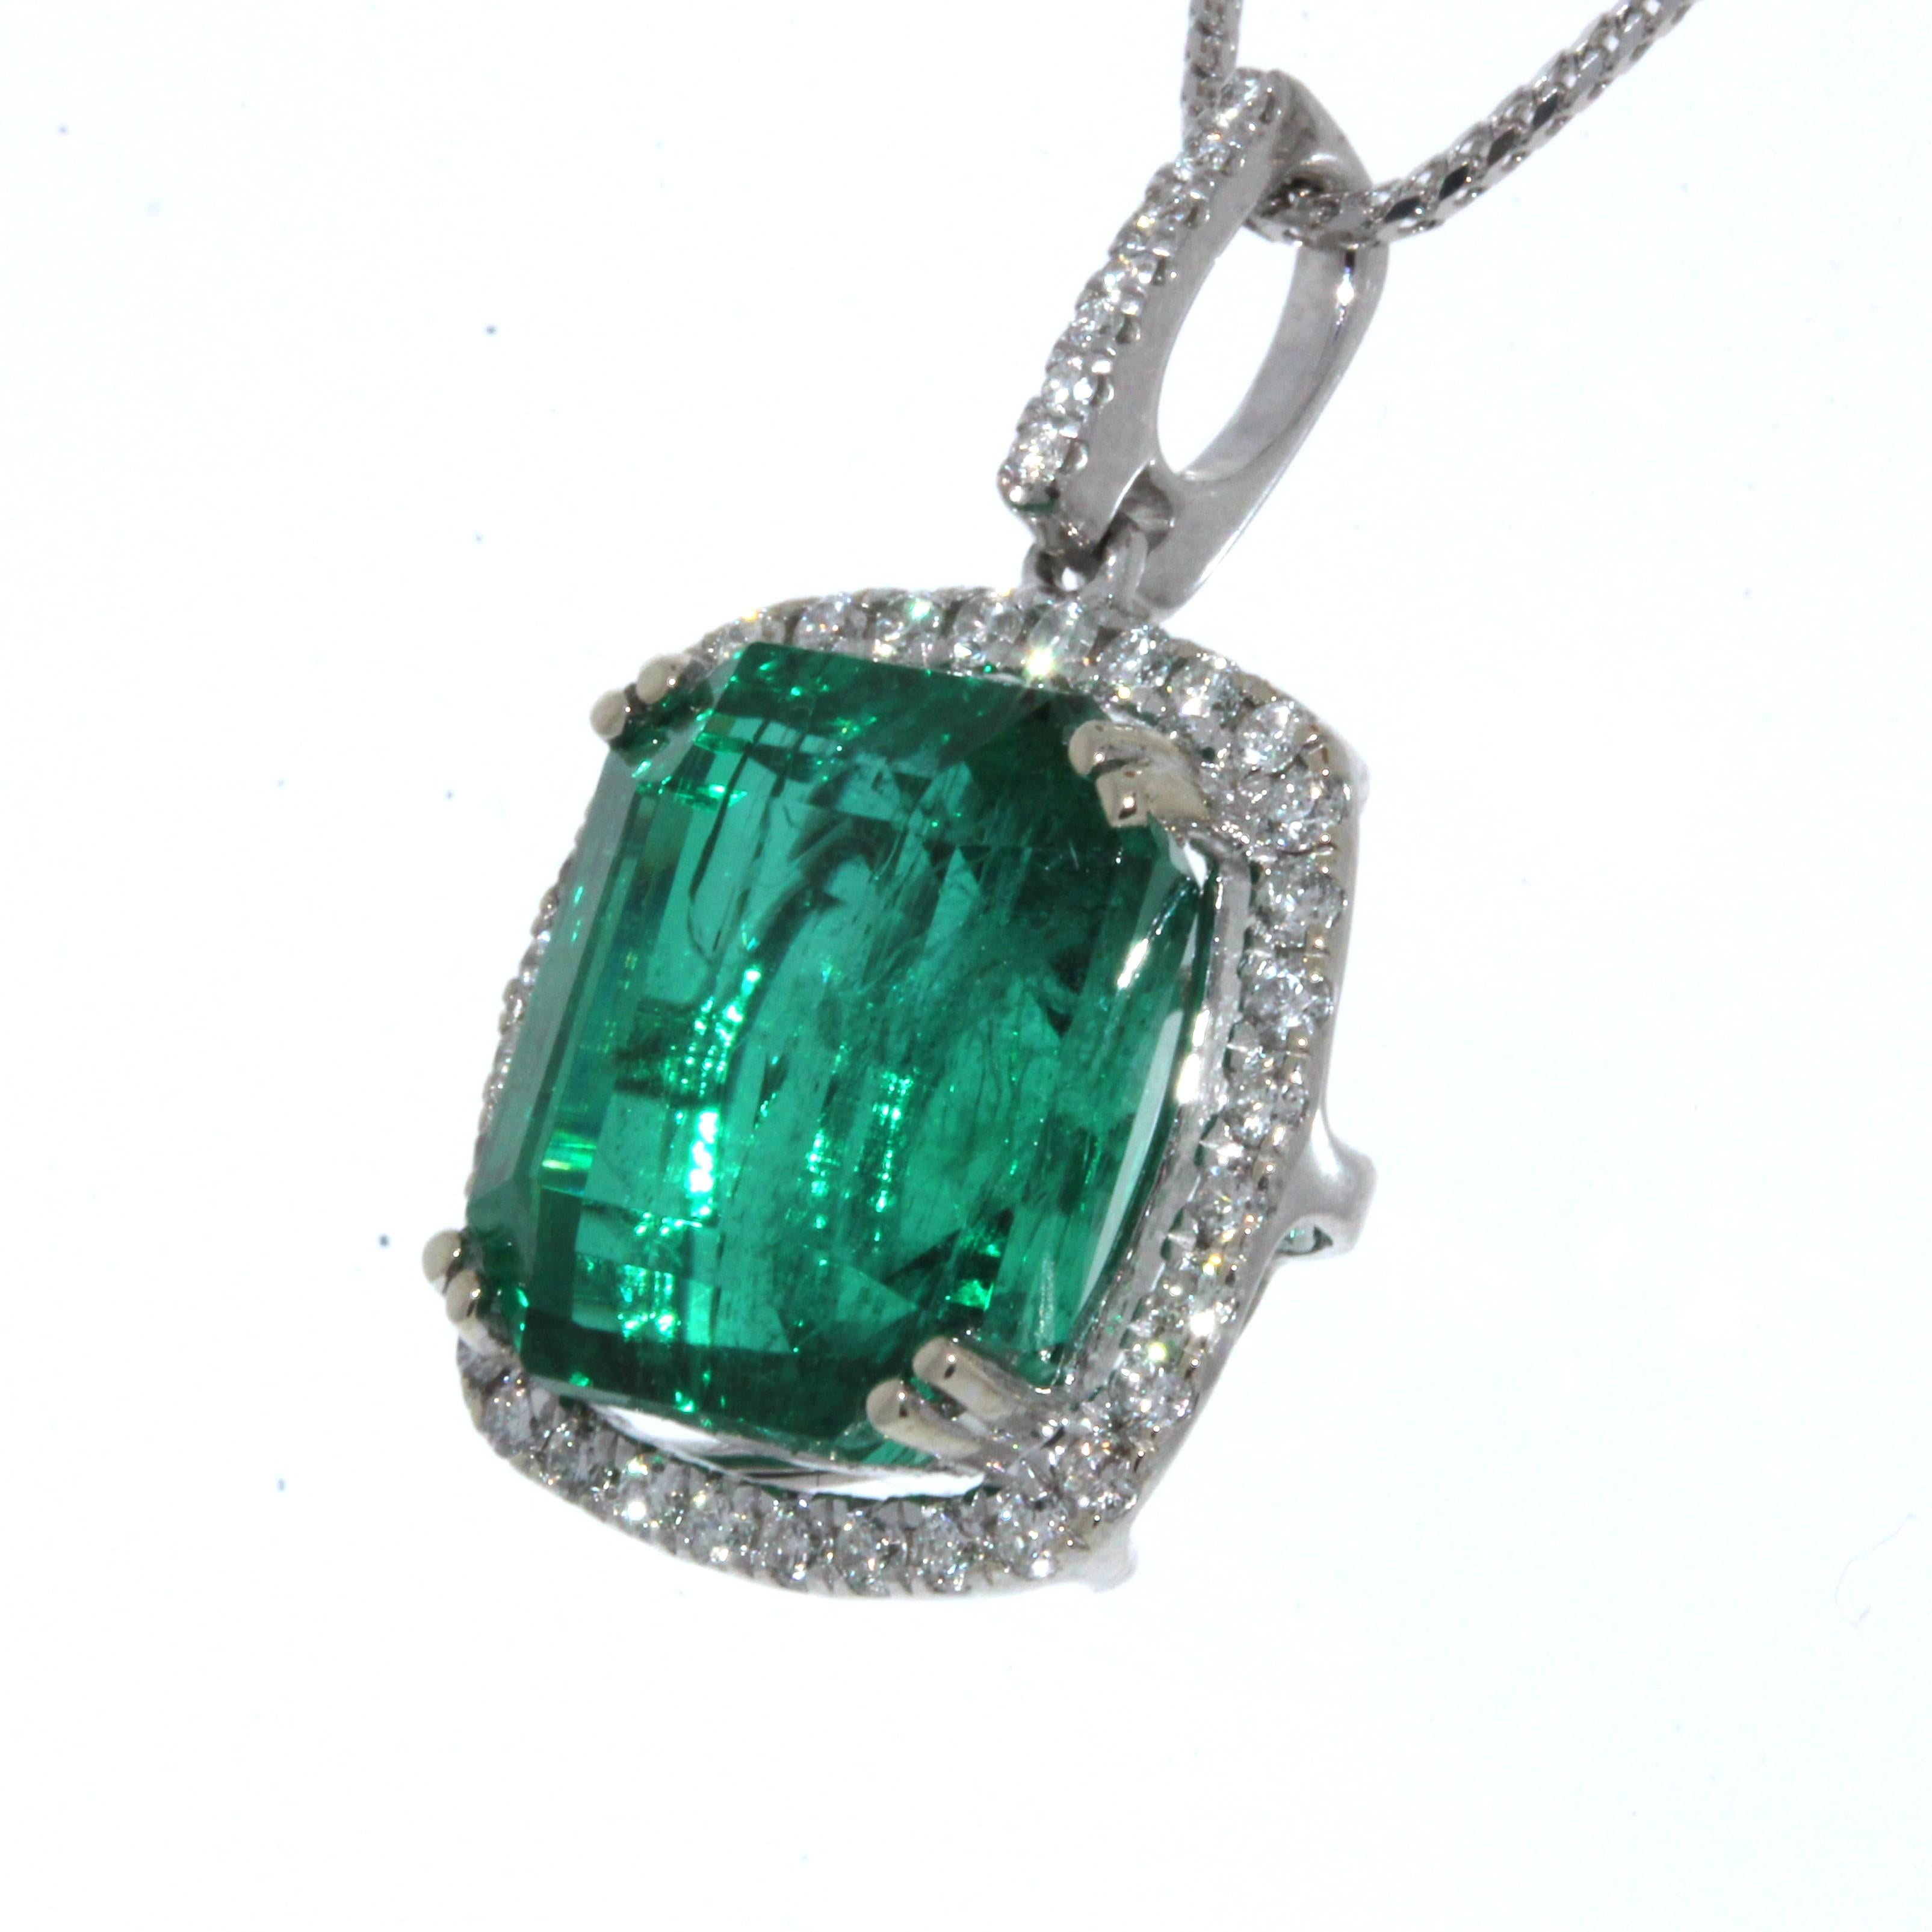 Finish your look with a touch of elegance wearing this gorgeous pendant. One 9.34 carat emerald cut green Emerald takes center stage is surrounded by 39 round brilliant cut diamonds 0.50 carat total weight. The pendant is set in 18K White Gold. This